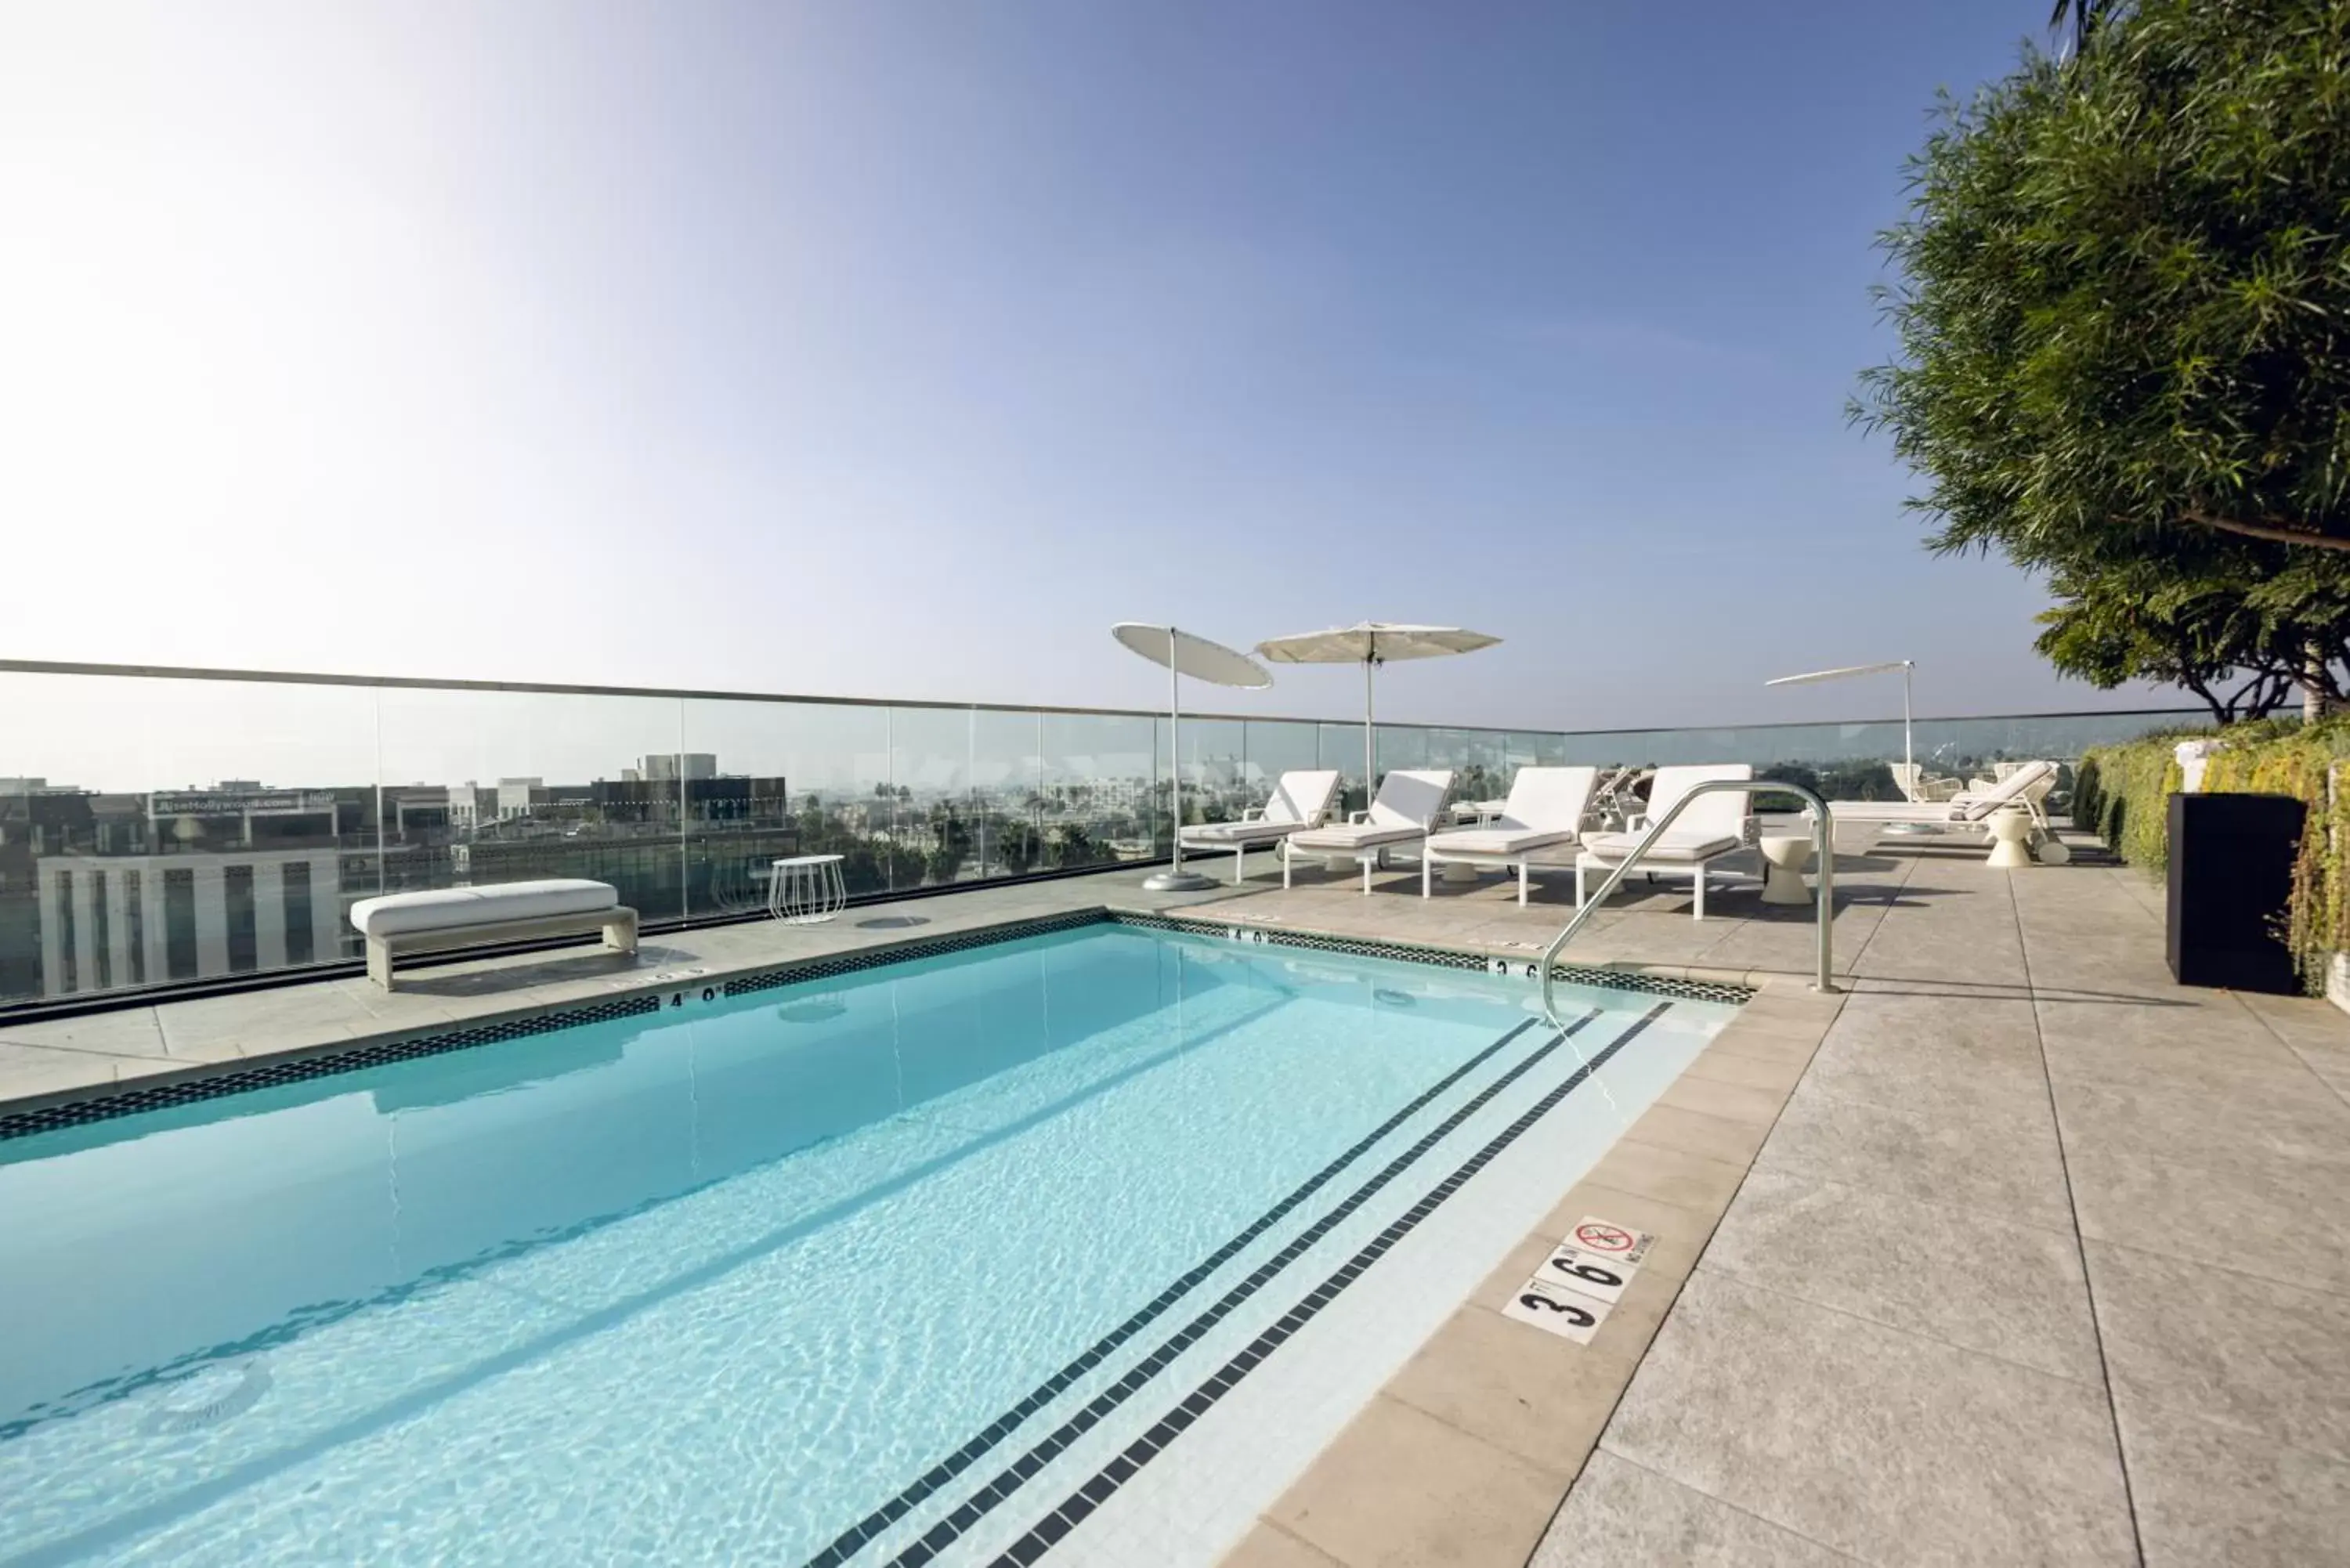 Swimming Pool in The Godfrey Hotel Hollywood